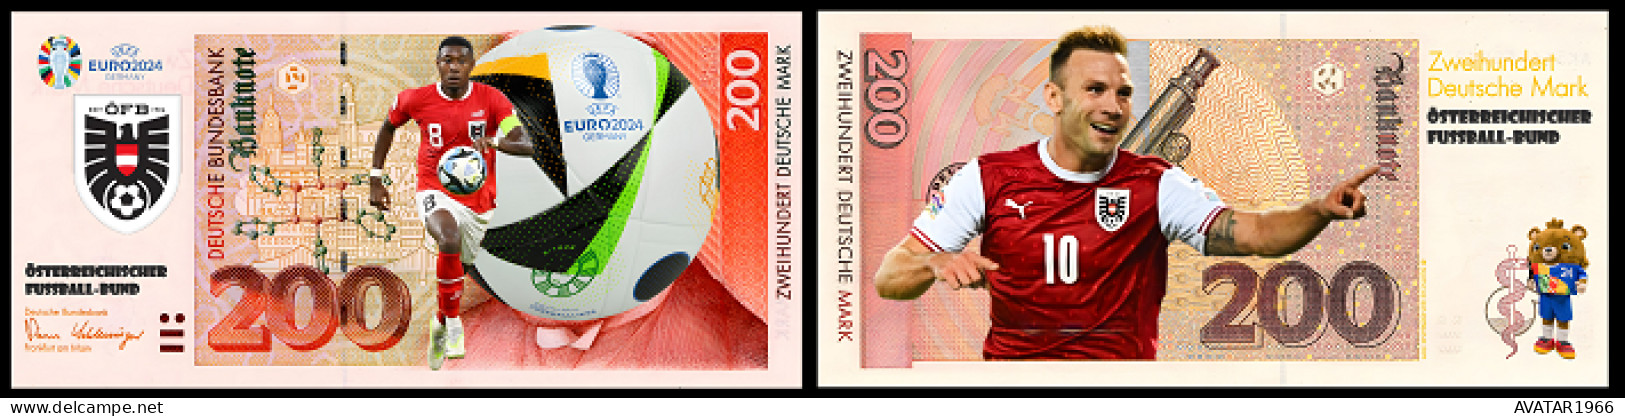 UEFA European Football Championship 2024 qualified country Österreich 8 pieces Germany fantasy paper money